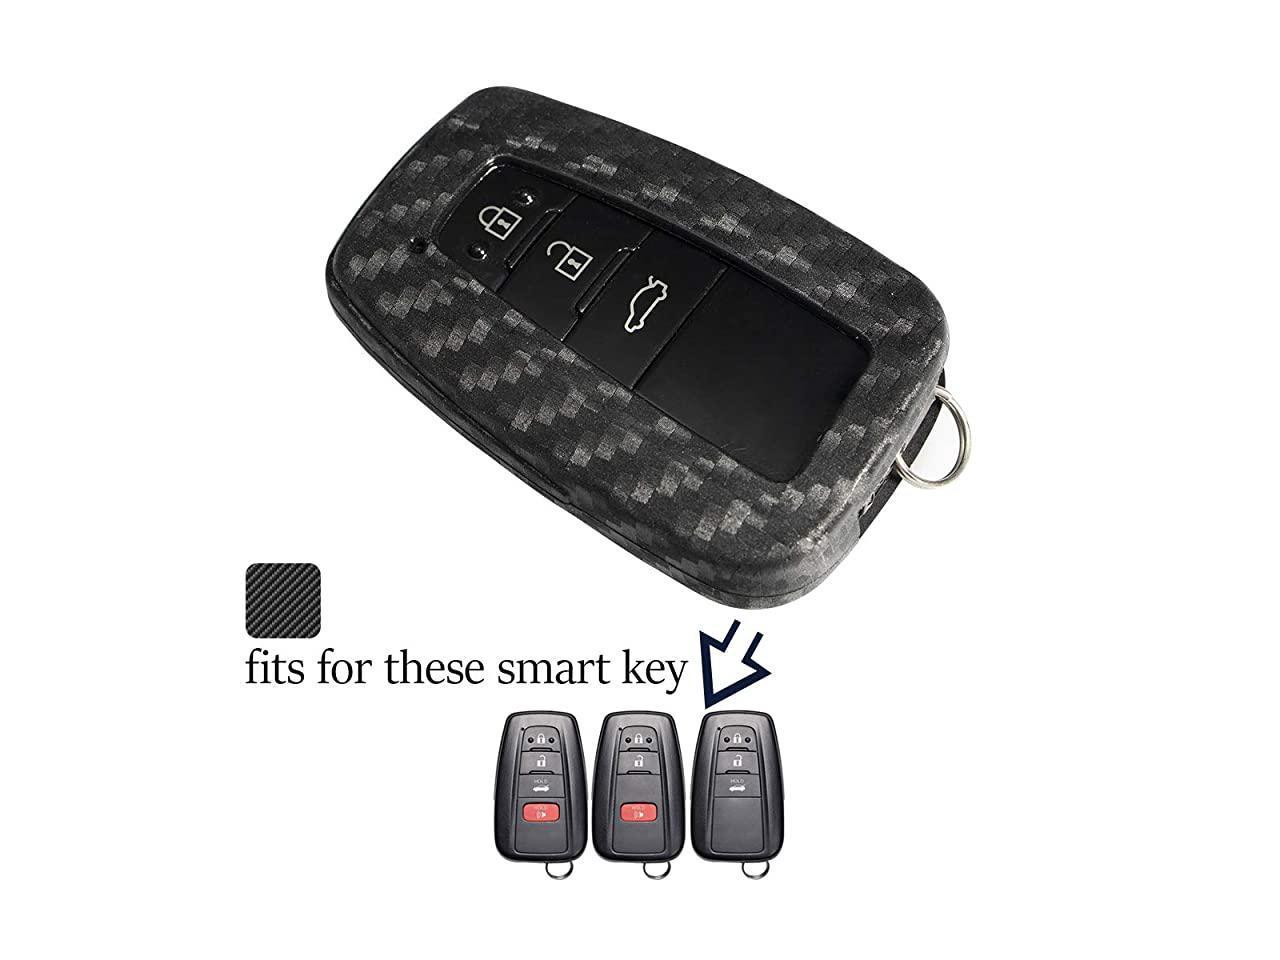 Red Key Fob Cover Case Fit for 2019 2018 2017 Toyota Highlander Avalon Camry Corolla RAV4 4 Buttons Keyless Entry Remote Case Holder ABS Carbon Fiber Pattern 